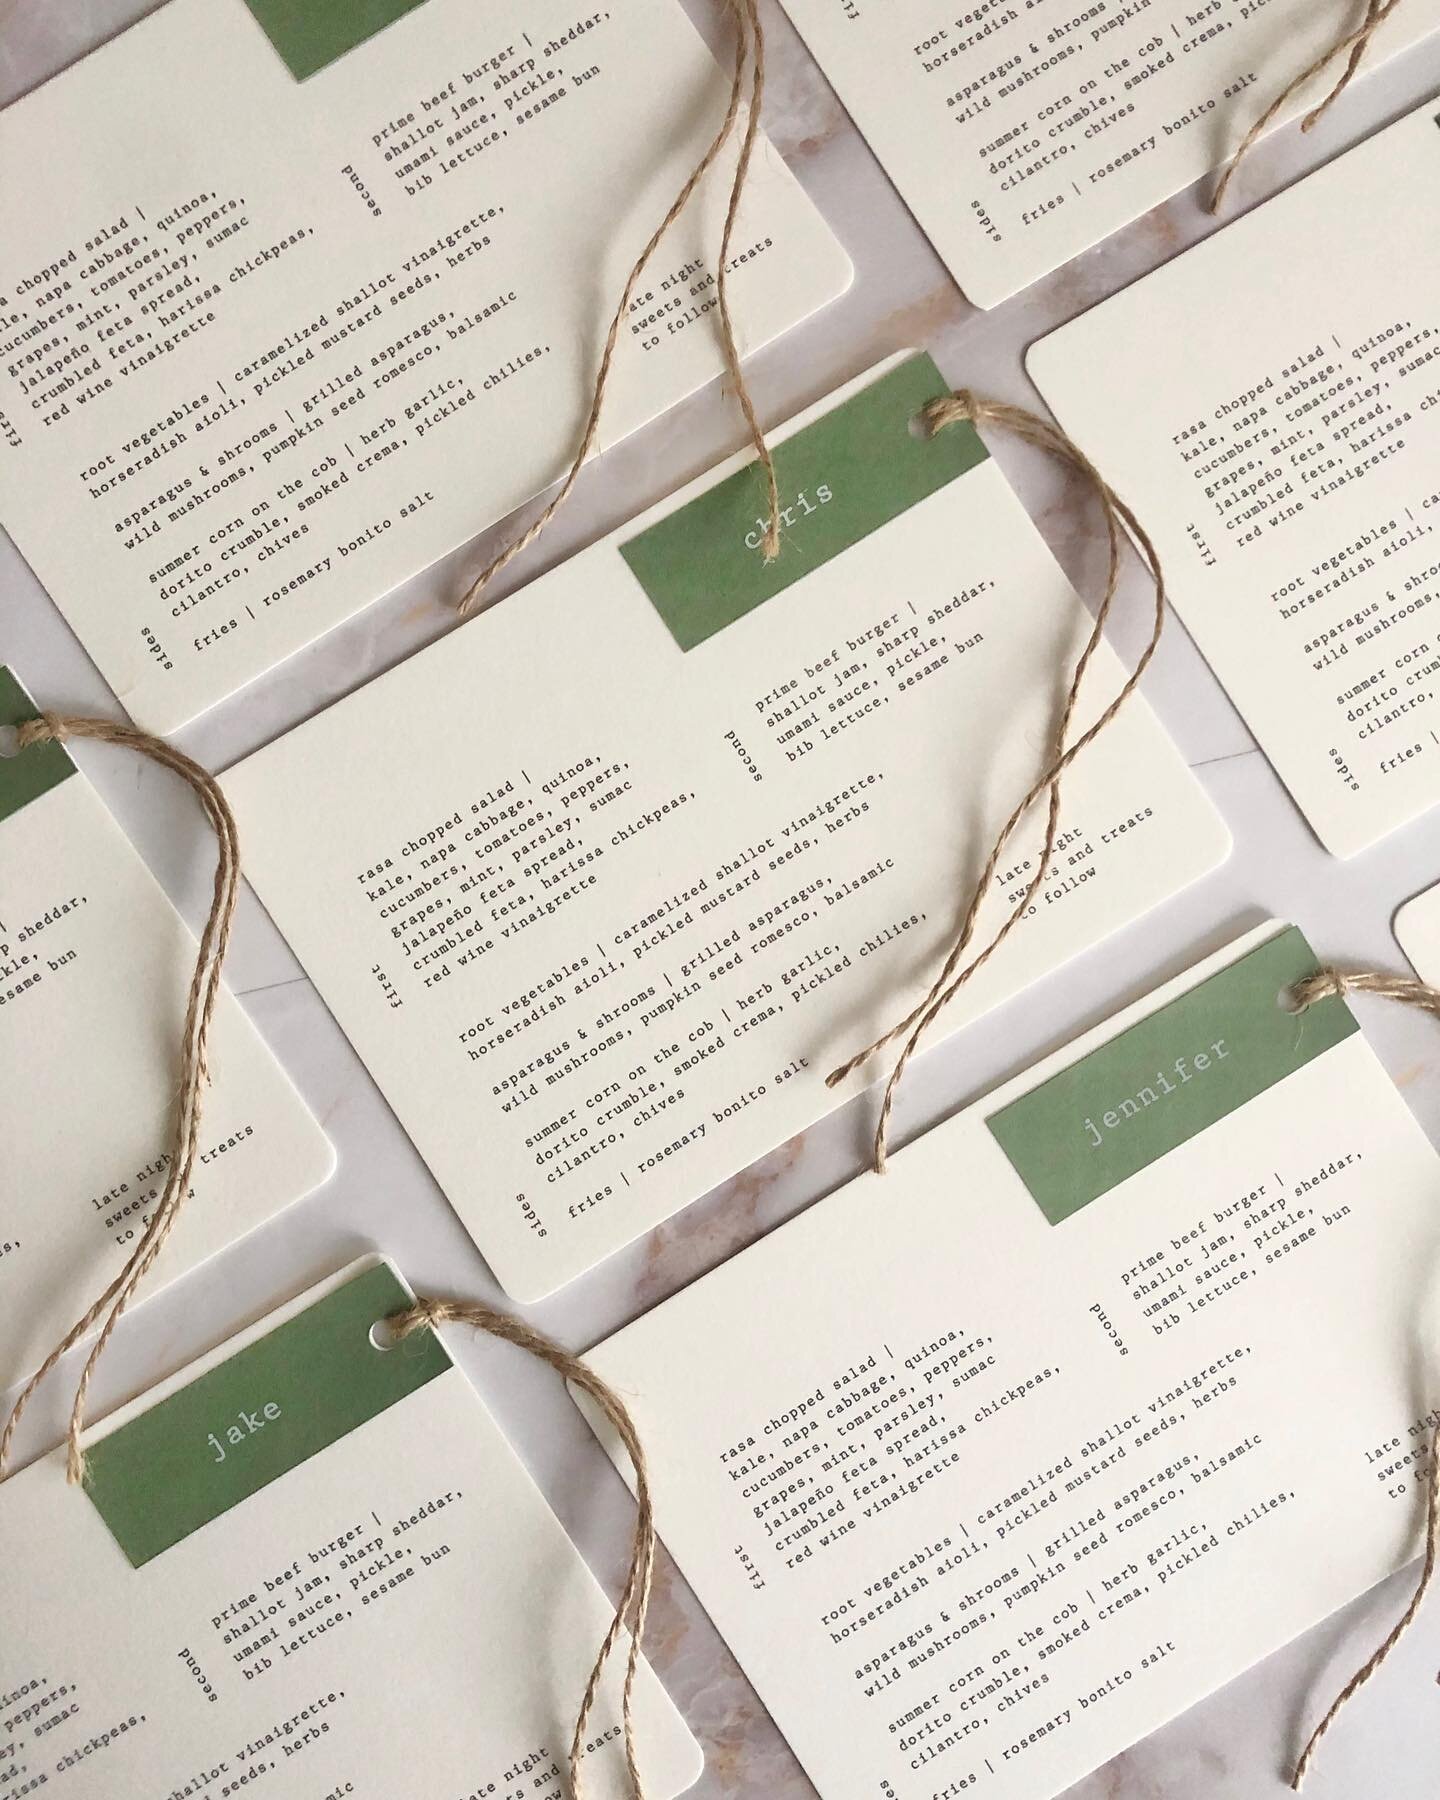 When the food is this good, you&rsquo;ll want your guests to know what they can get excited about 😛🍽
⠀⠀⠀⠀⠀⠀⠀⠀⠀
#menu #menus #weddingmenu #personalizedmenu #wedding #cottagewedding #muskokawedding #raquelwalmancreative